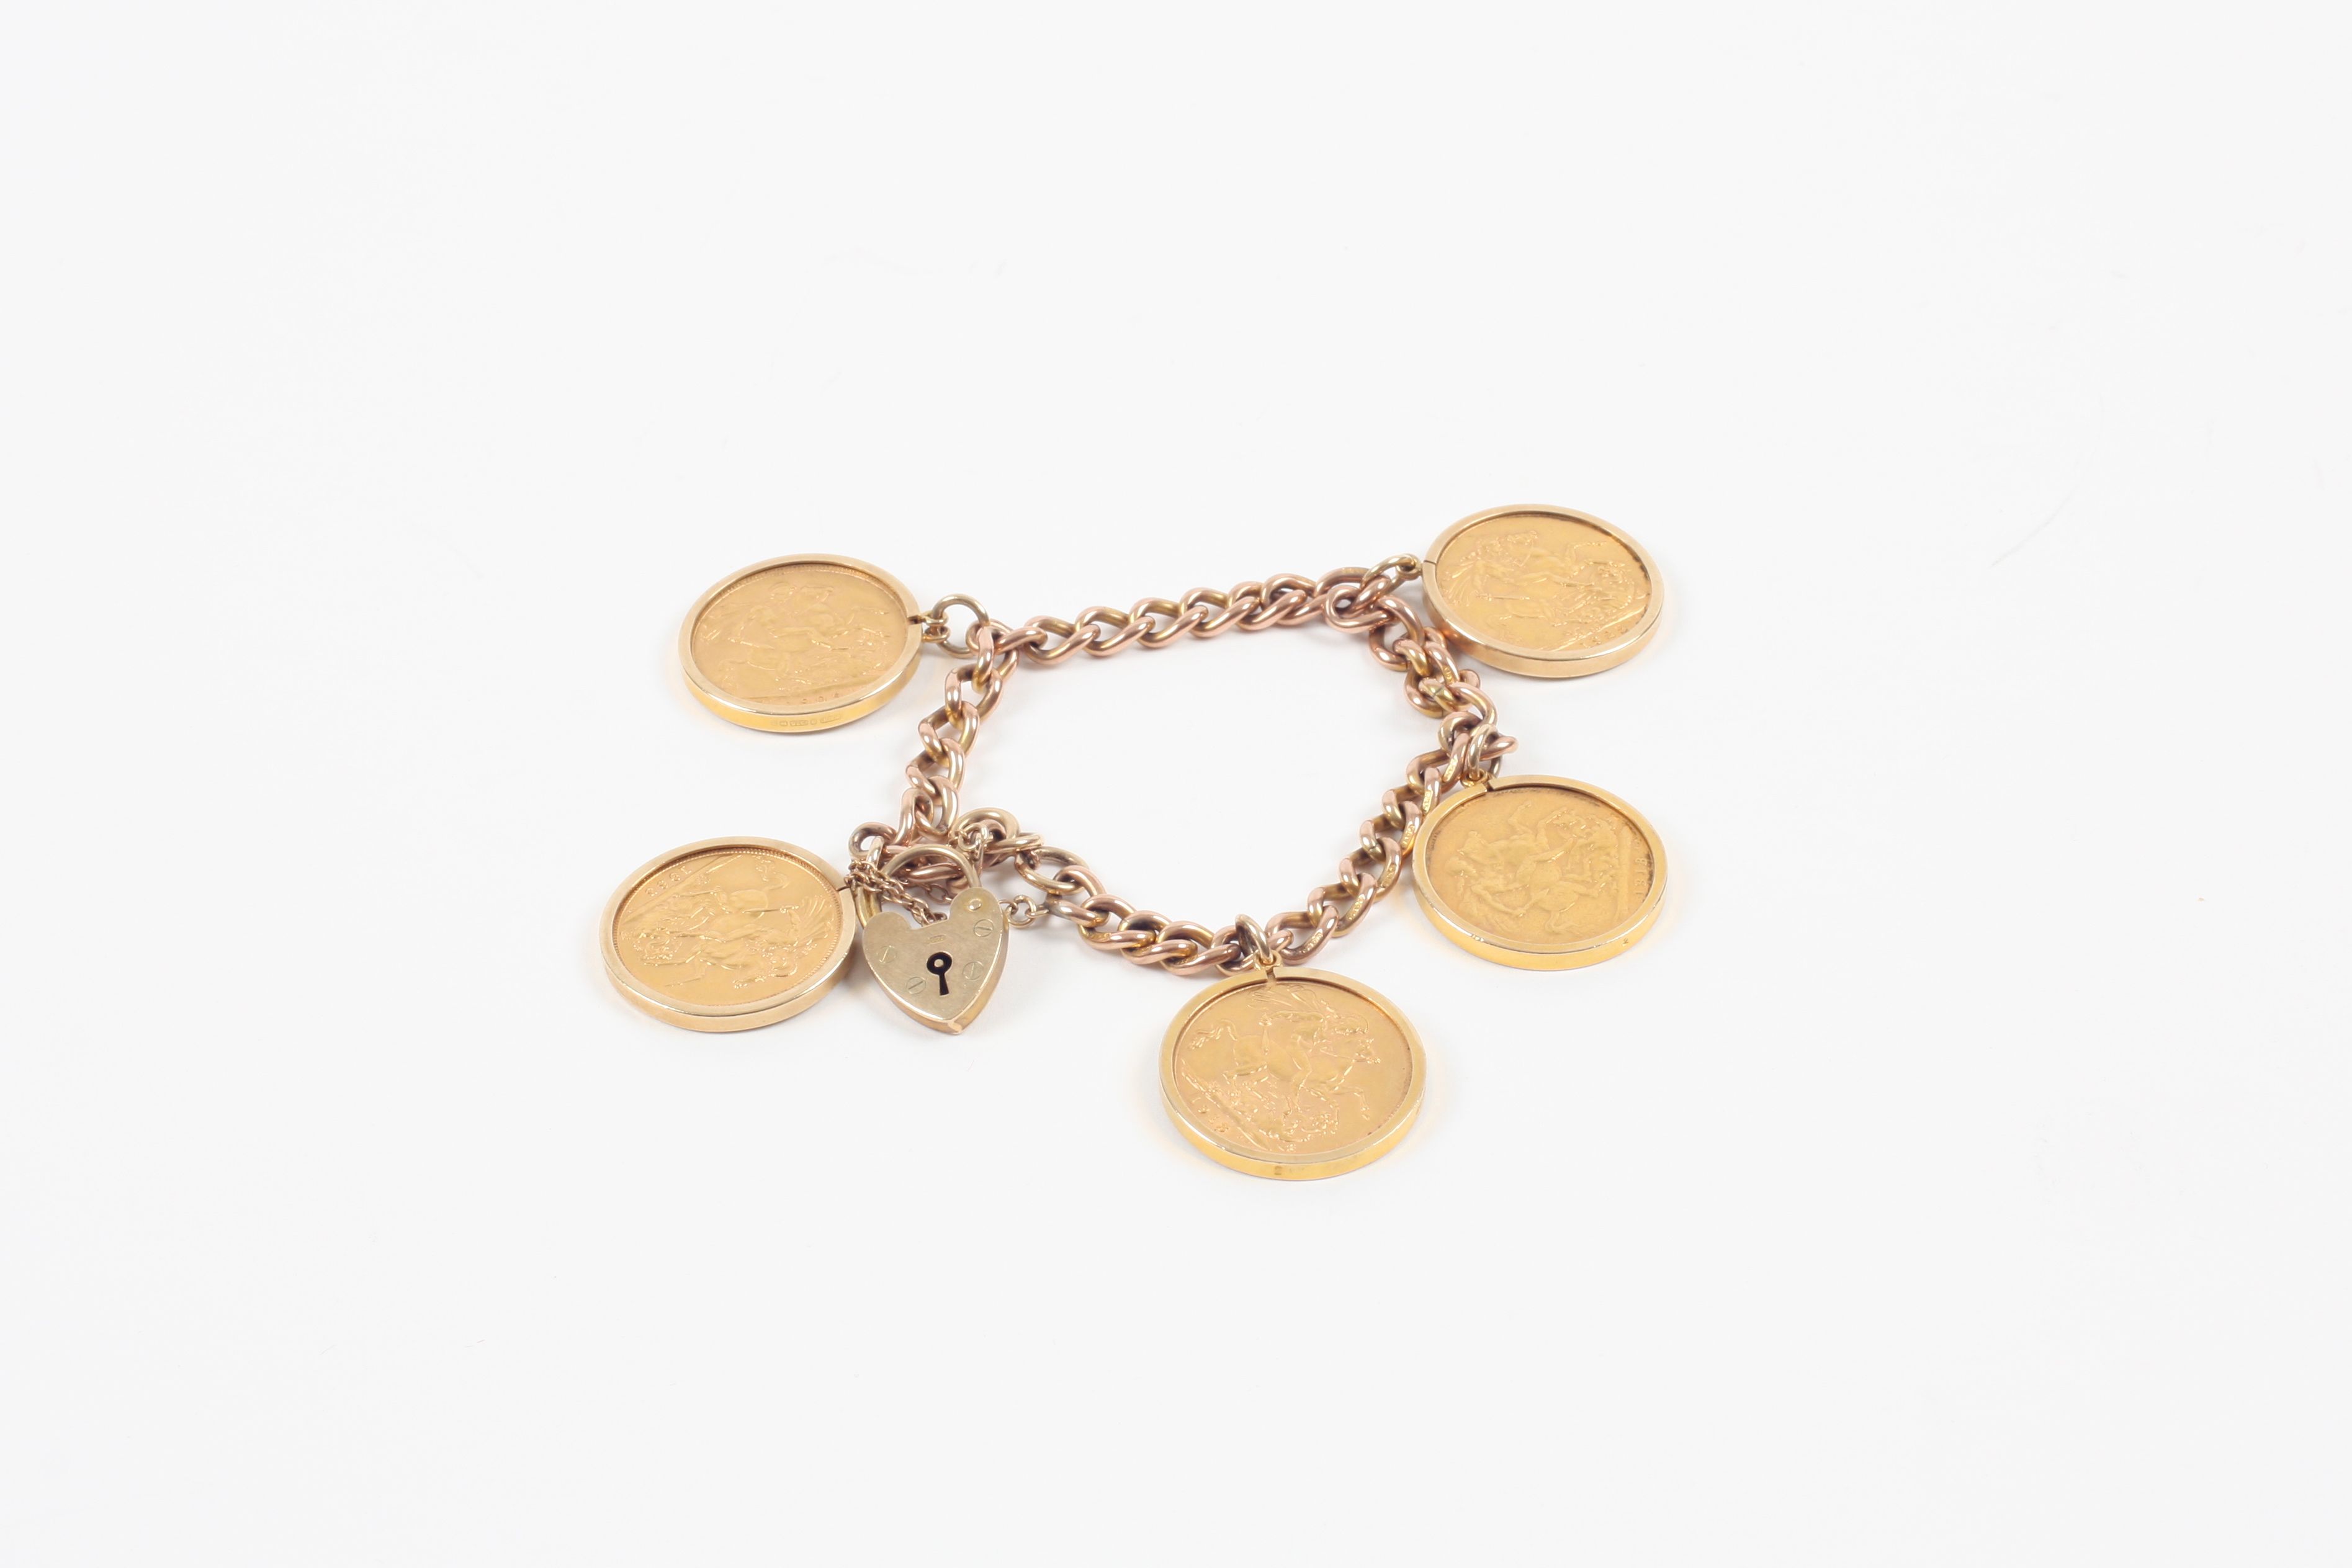 A gold bracelet set with five full sovereigns dated 1909, 1913 (2), 1925, and 1965, all in 9ct